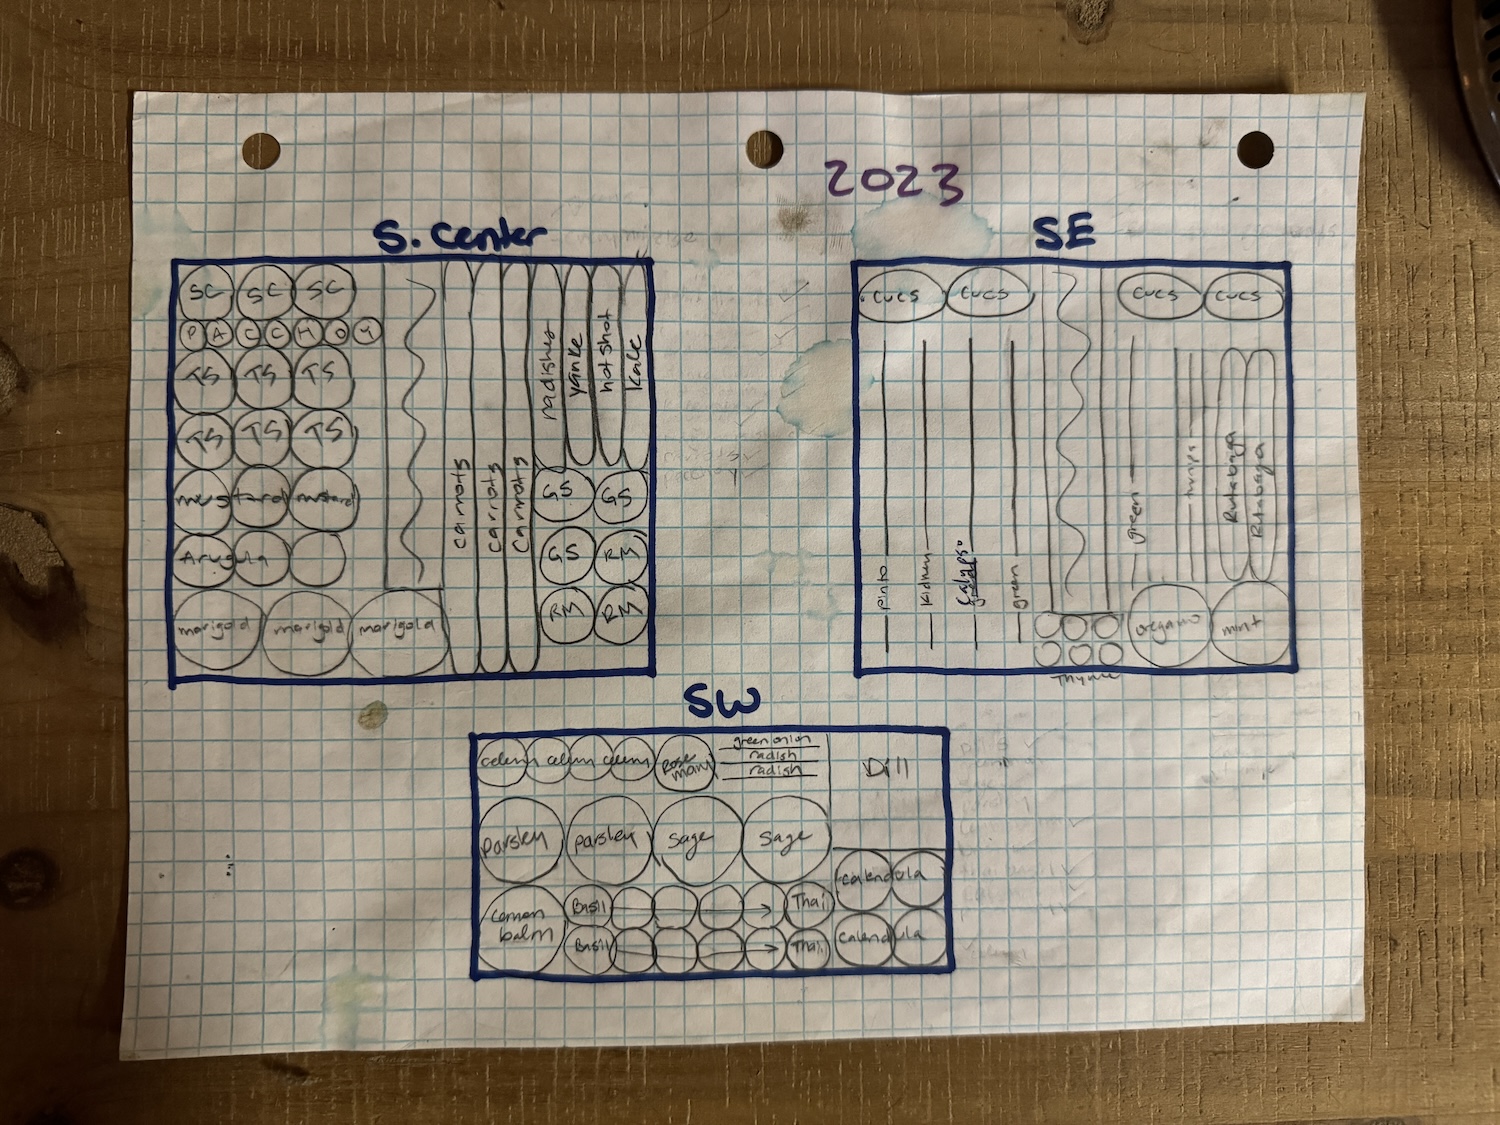 A graph paper drawing of 3 garden beds